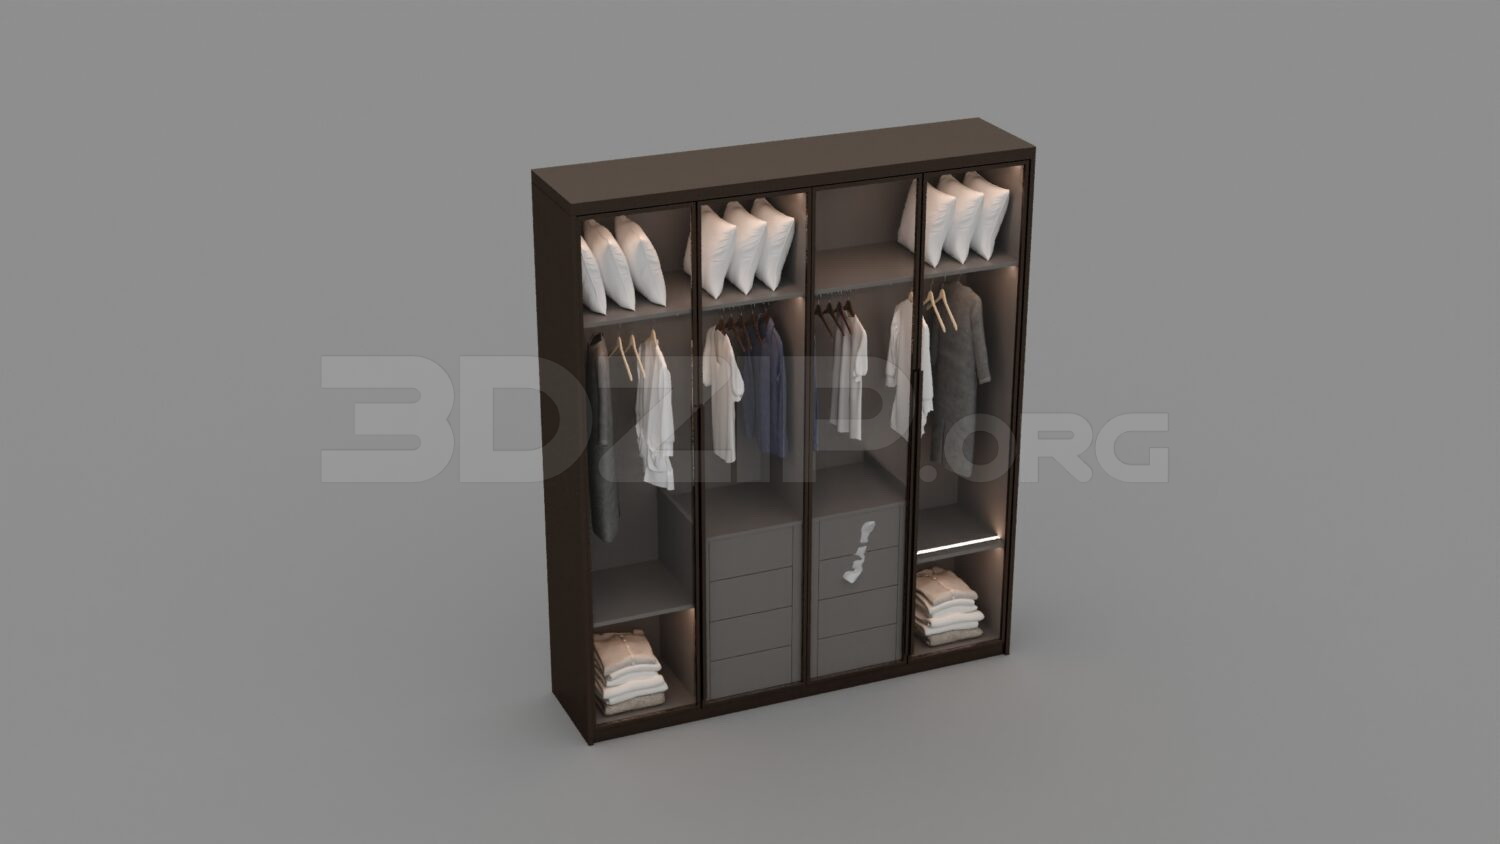 1204. Download Free Wardrobe Model By Huy Hieu Lee